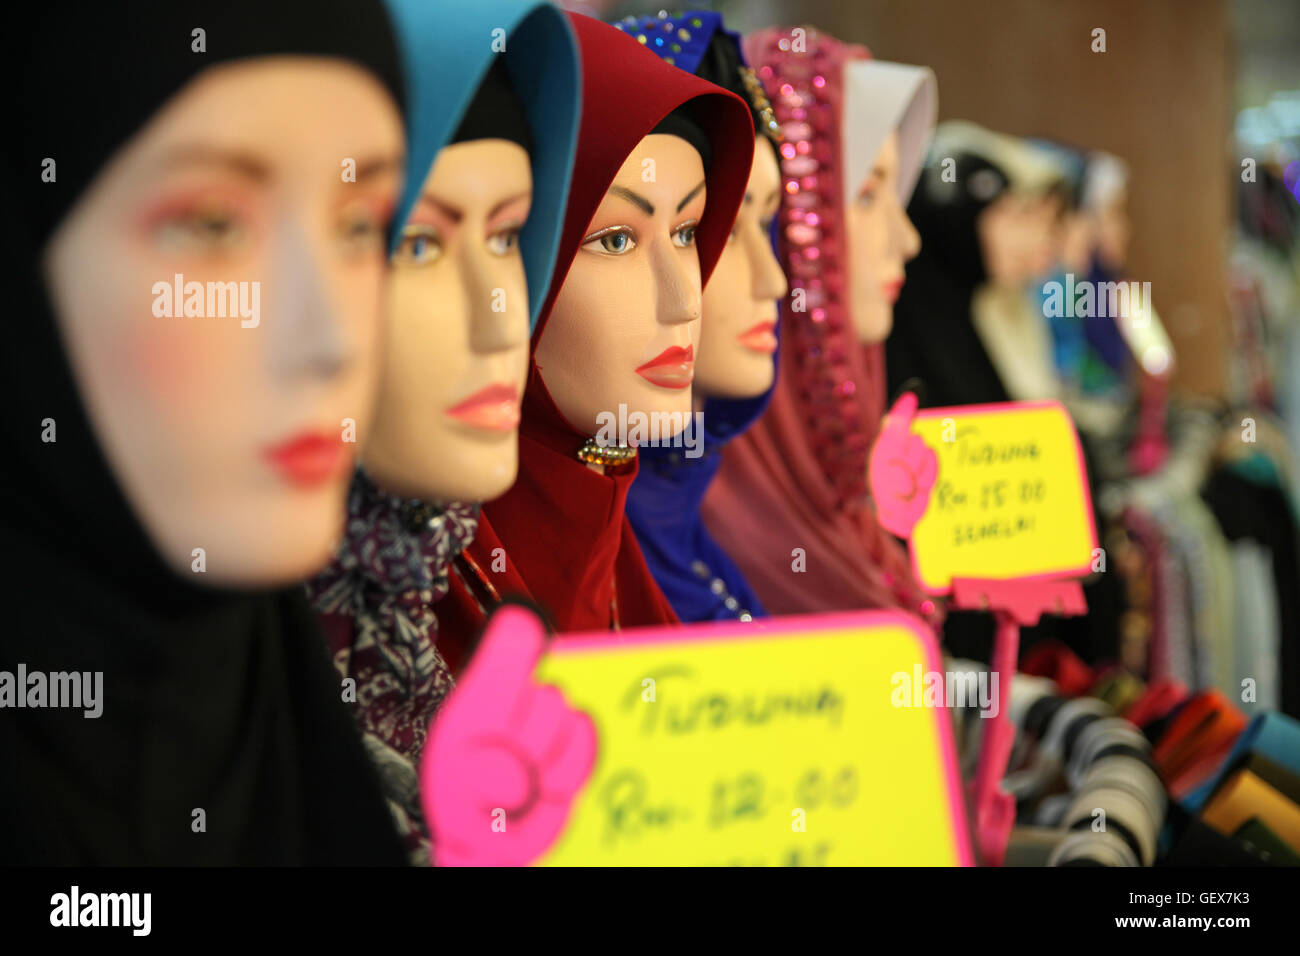 Display dummies with headscarfs in a shop Stock Photo